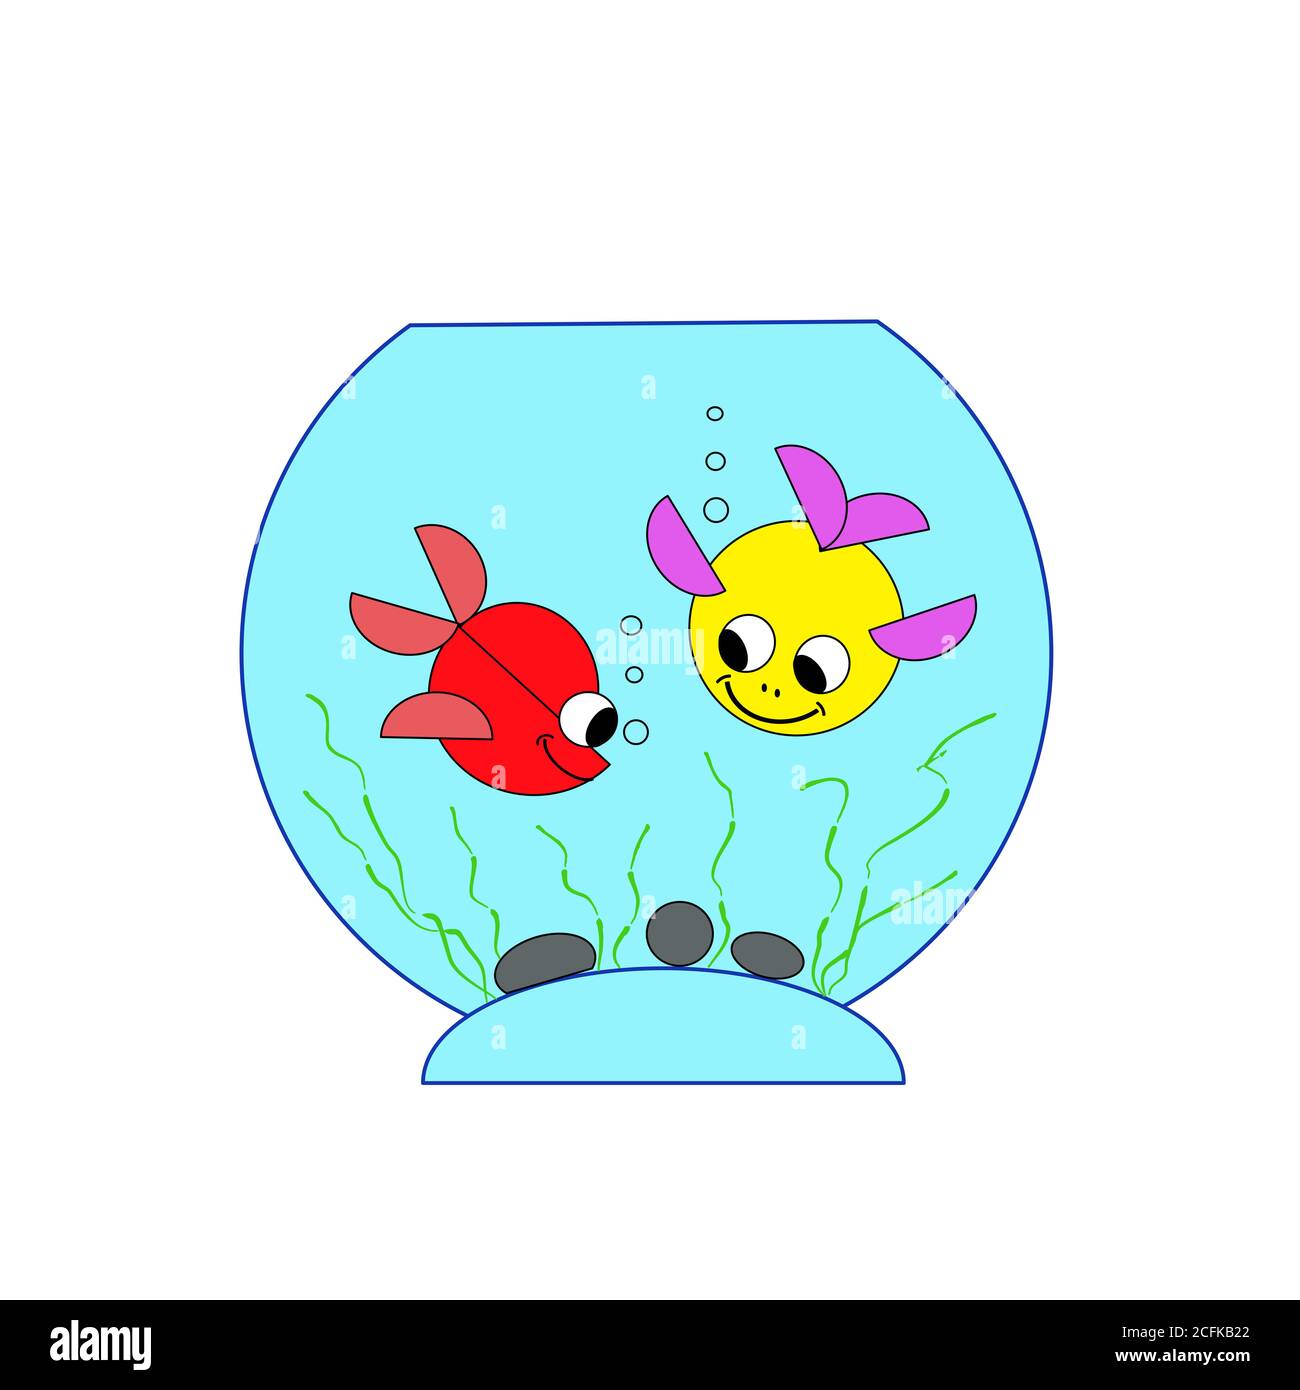 Cartoon Angel Fish High Resolution Stock Photography And Images Alamy,Peach Schnapps